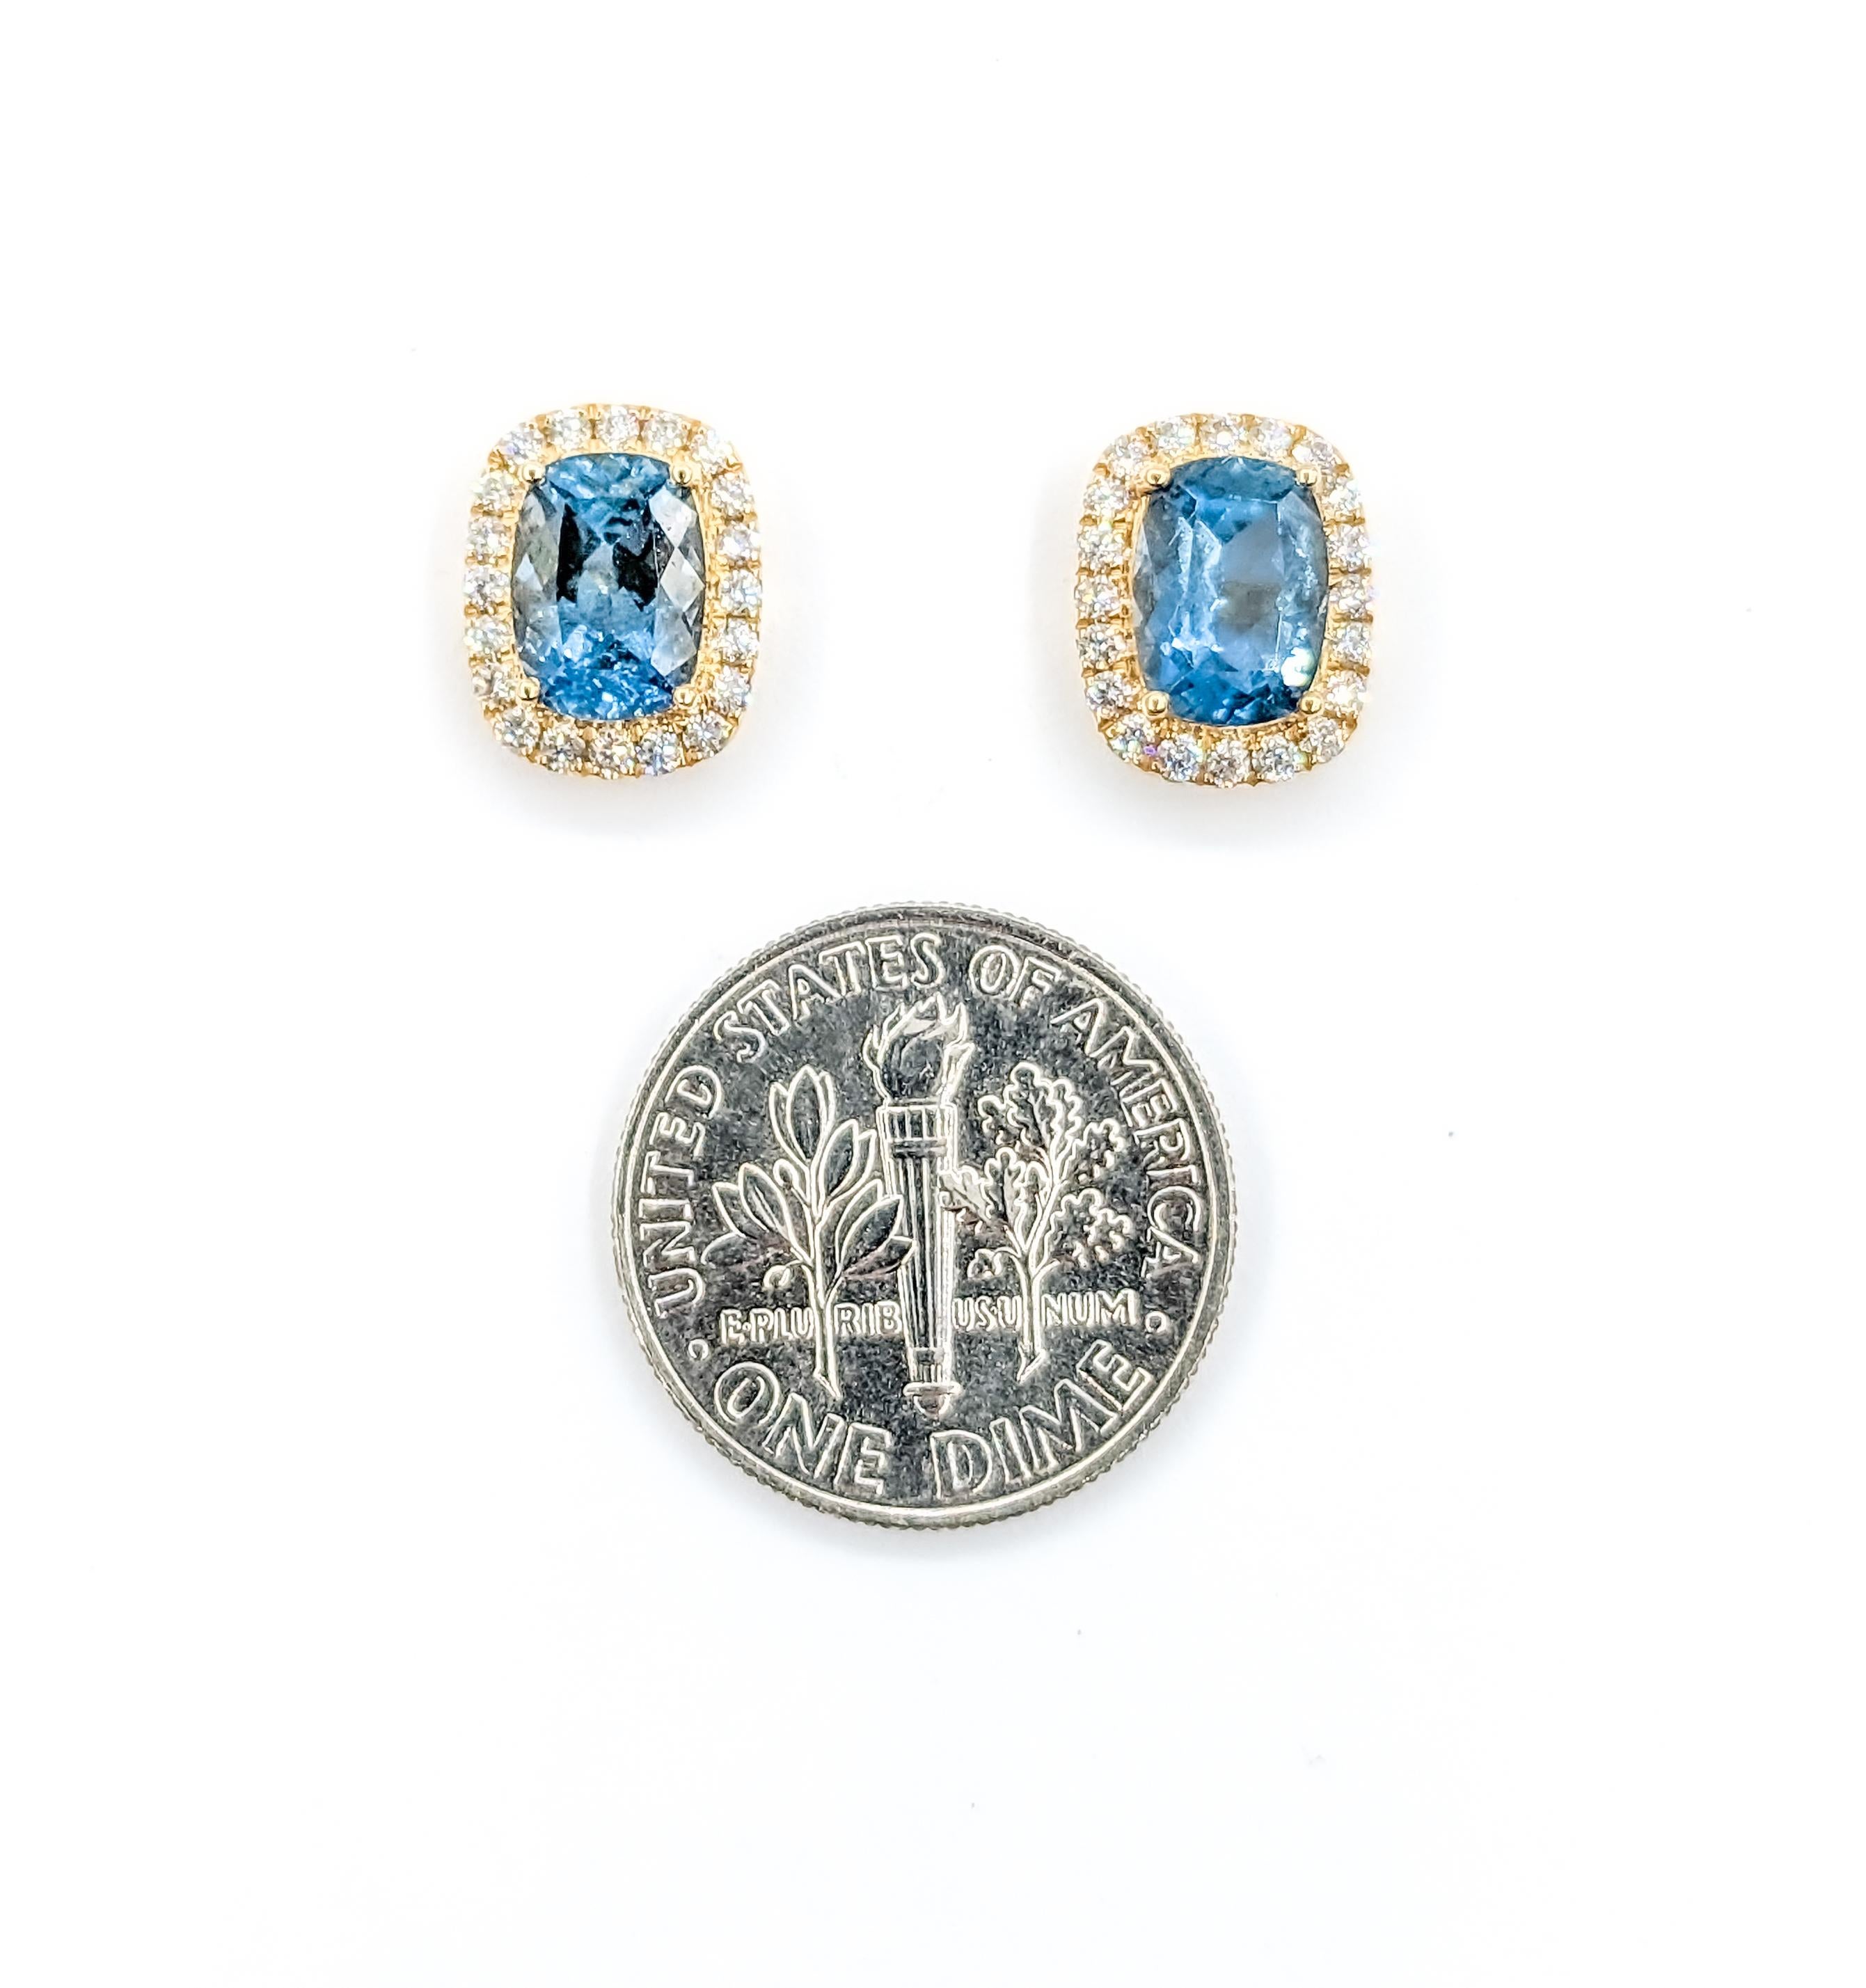 2.01ctw Aquamarine & Diamond Halo Earrings In Yellow gold

Presenting these exquisite Aquamarine Stud Earrings, masterfully crafted in 14K Yellow Gold and adorned with .34ctw of radiant Diamonds in the form of glittering halos. These diamonds shine